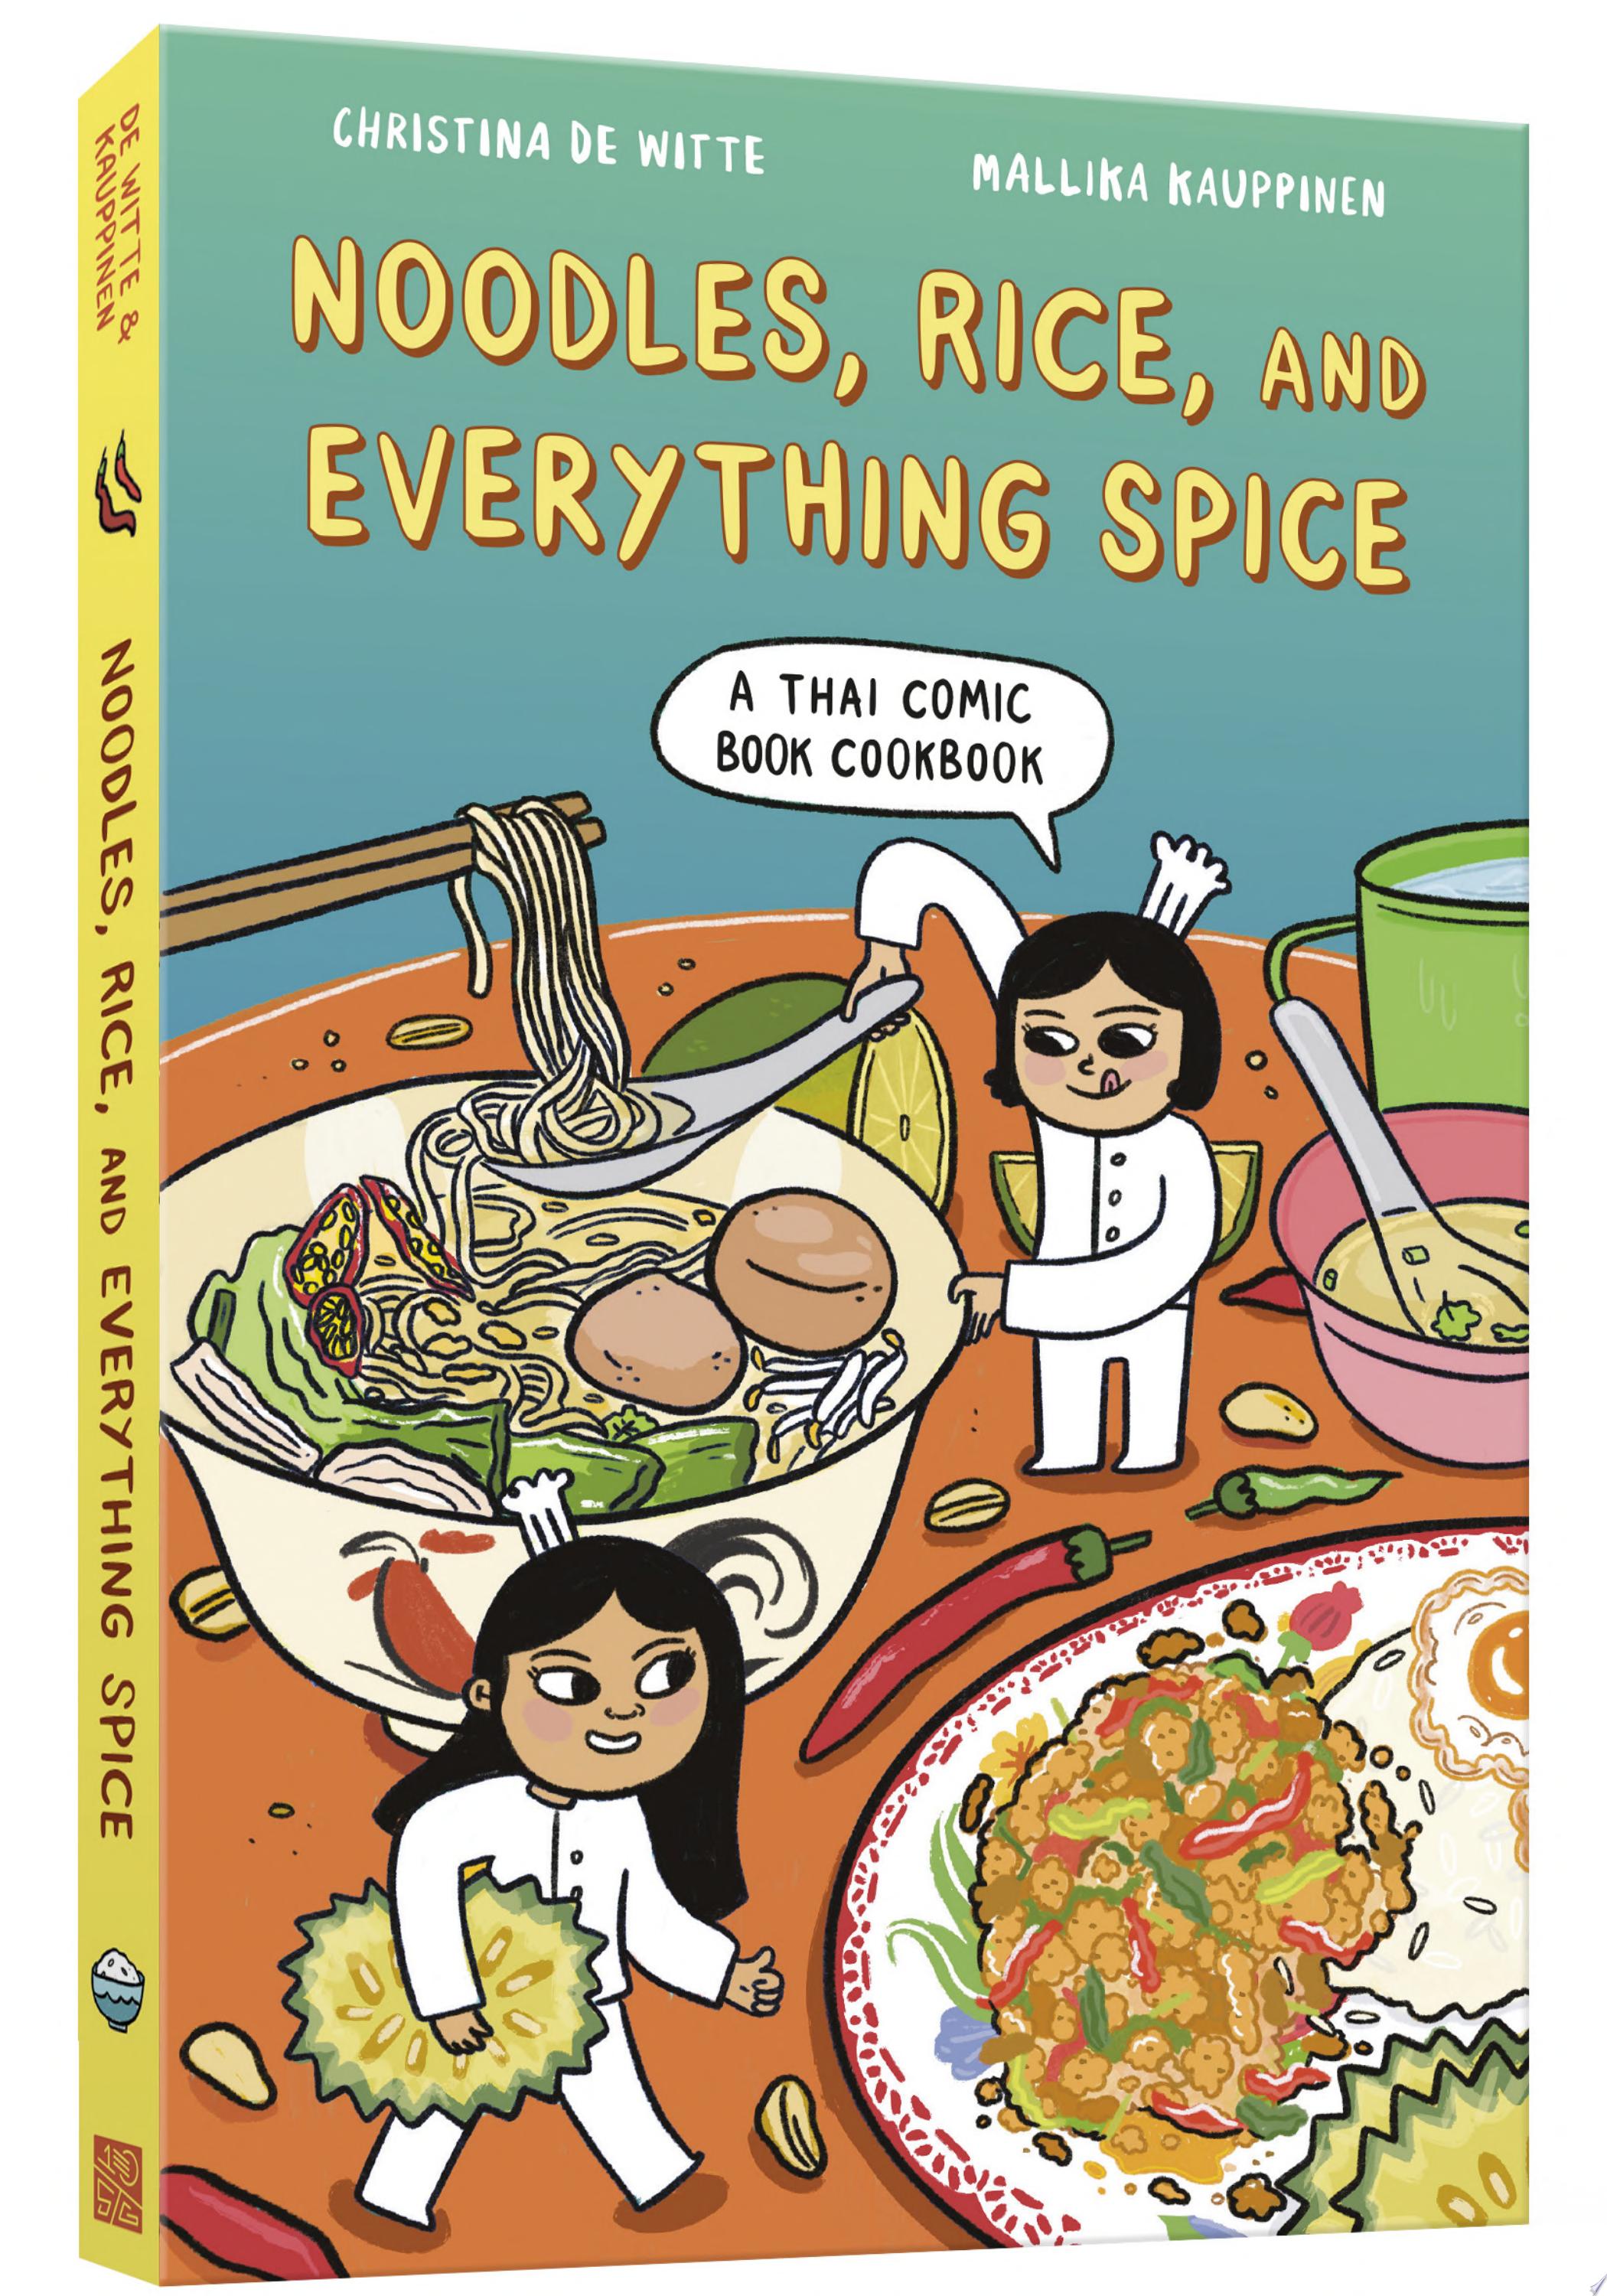 Image for "Noodles, Rice, and Everything Spice"